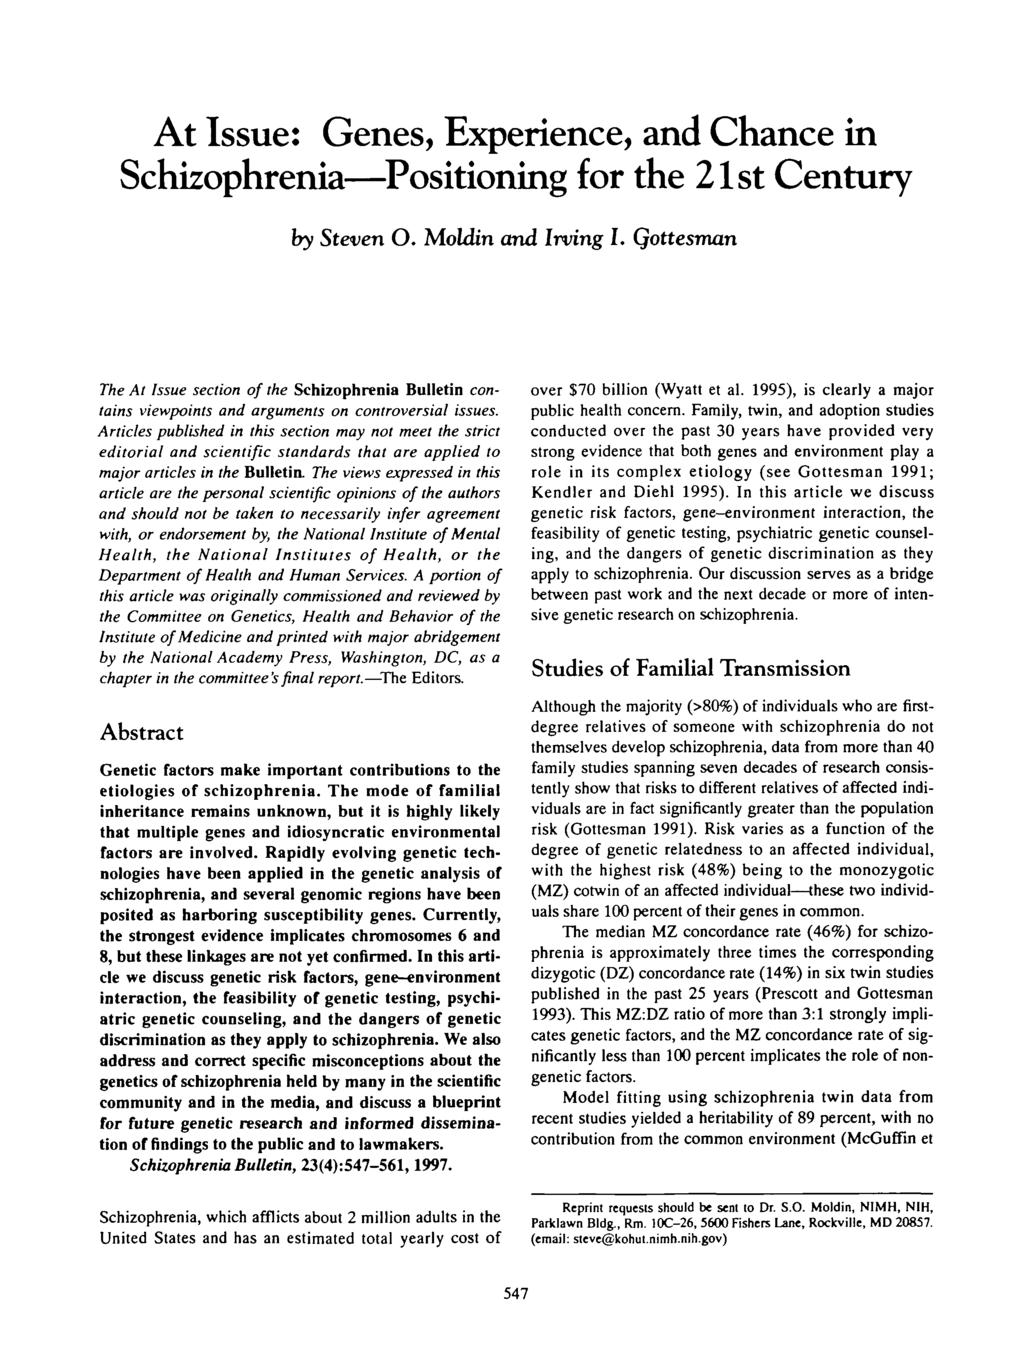 At Issue: Genes, Experience, and Chance in Schizophrenia Positioning for the 21st Century by Steven O. laoldin and Irving I.